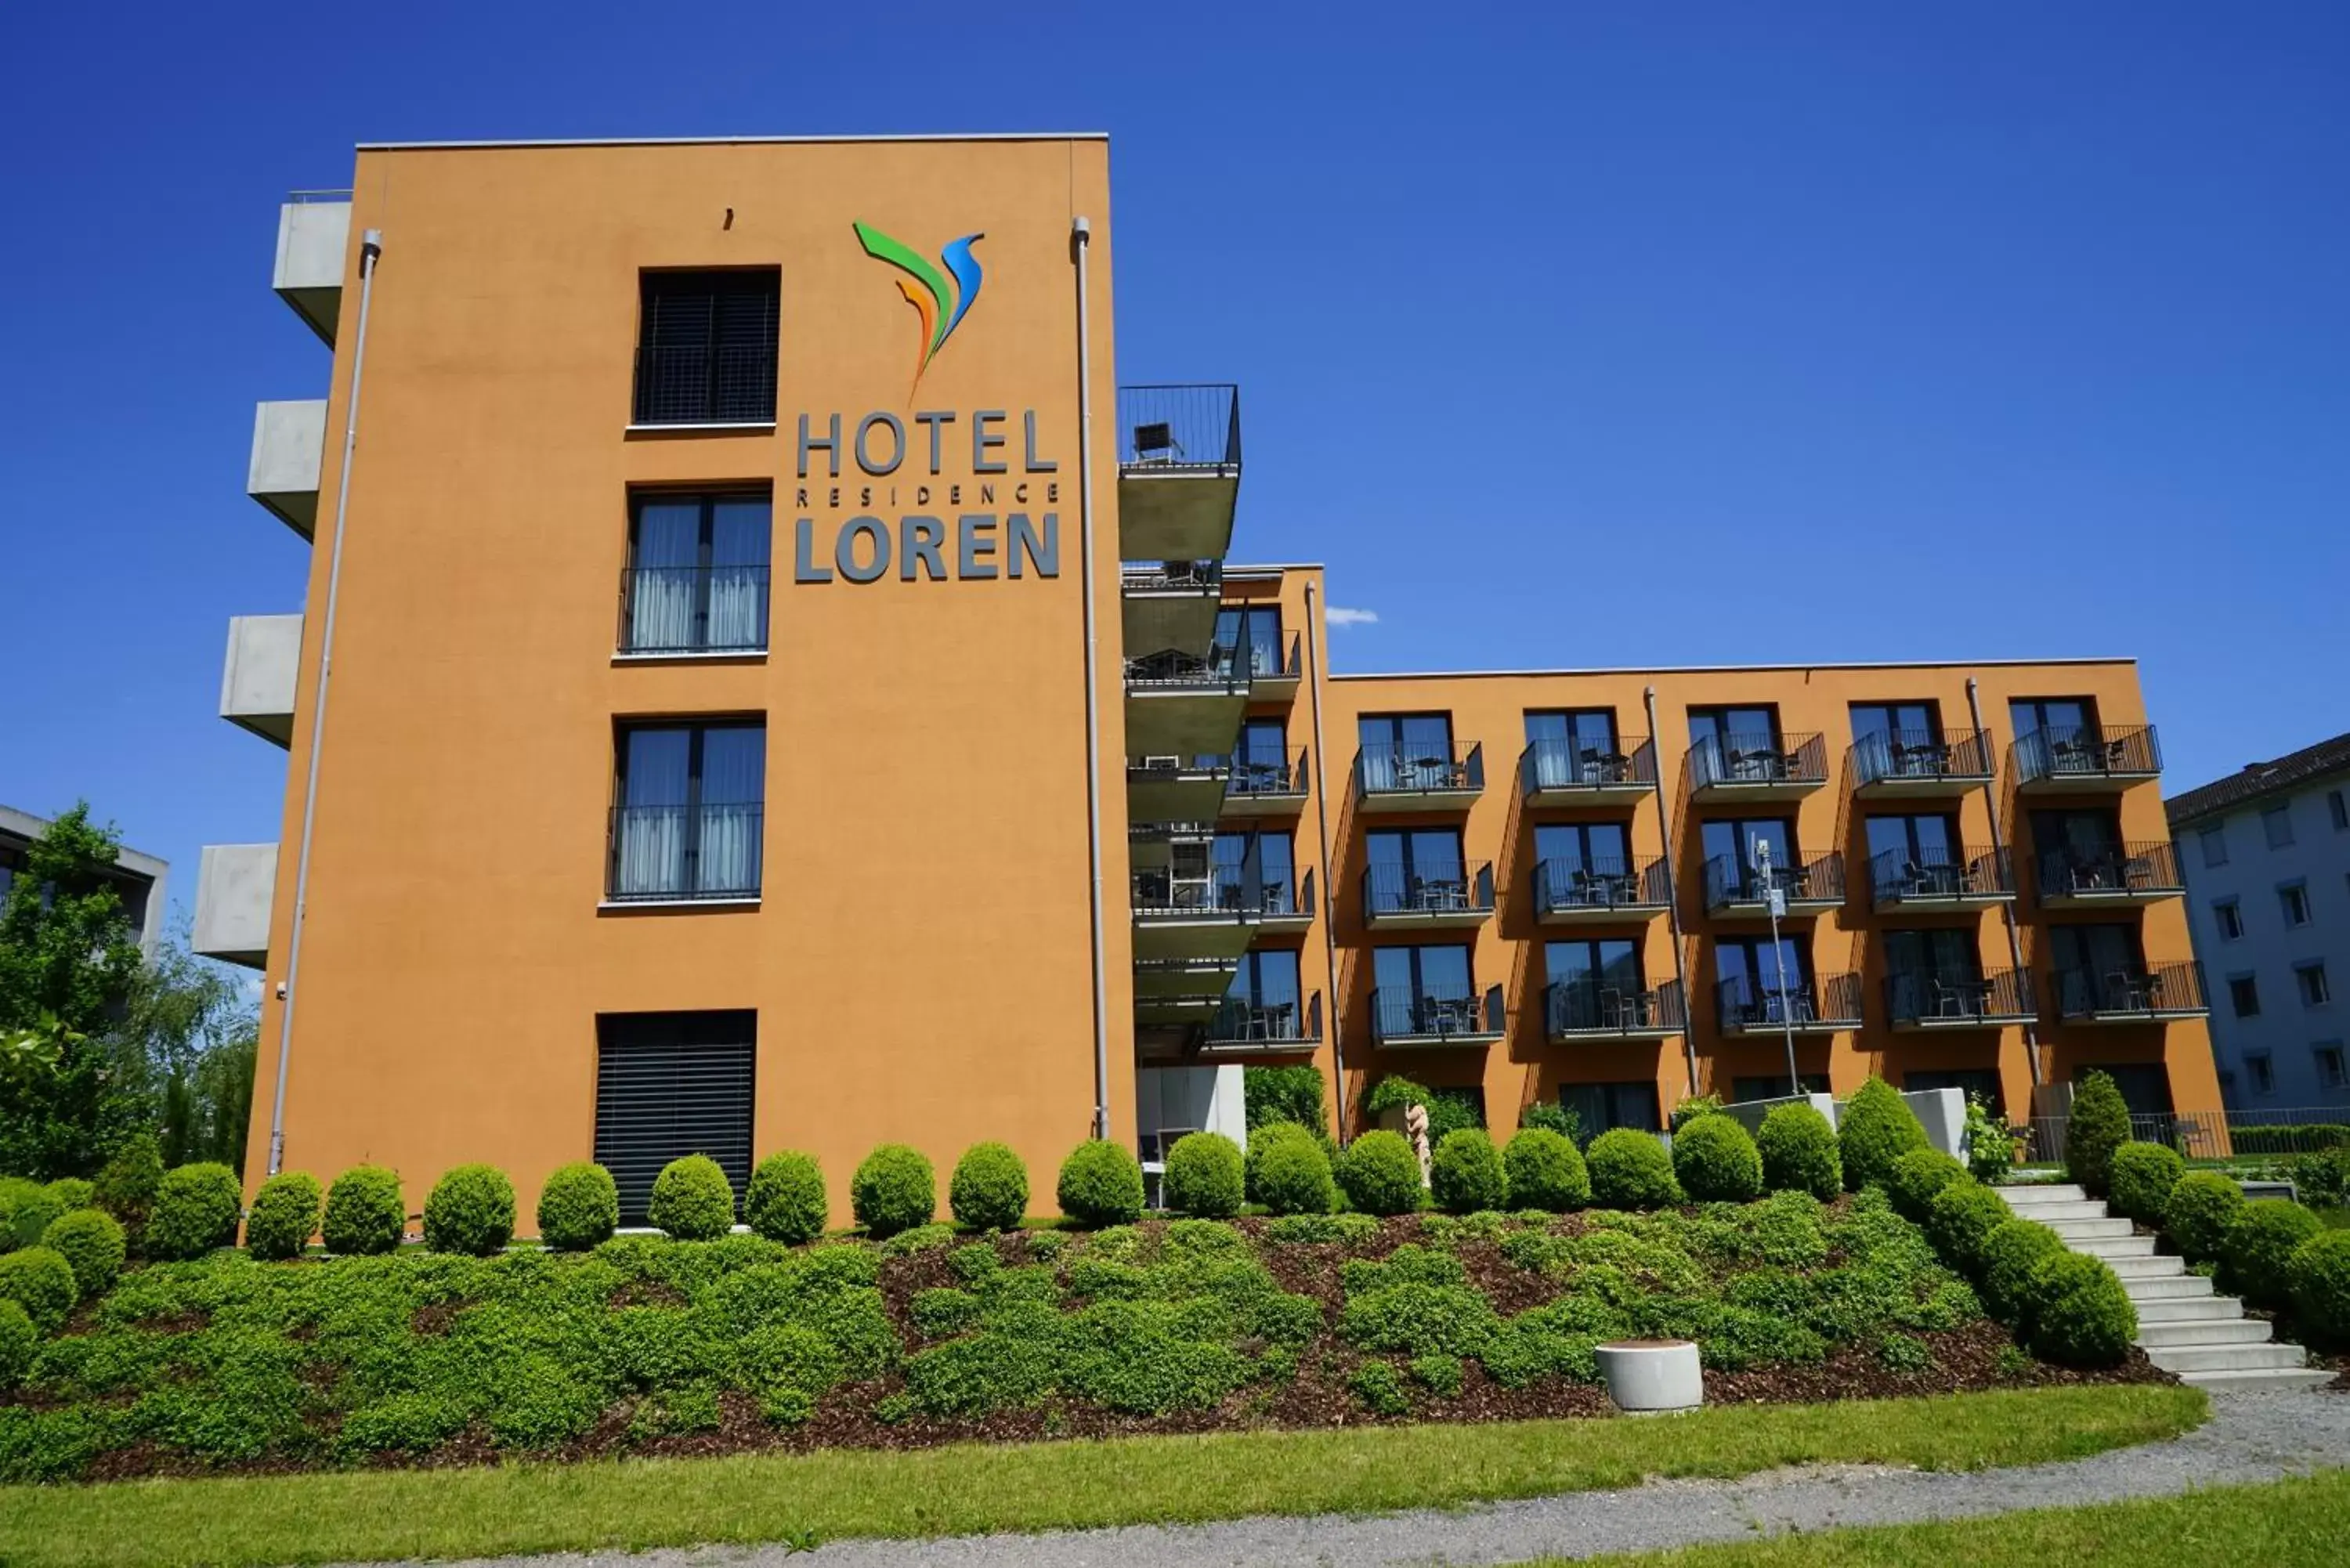 Facade/entrance, Property Building in Hotel Residence Loren - contact & contactless check-in